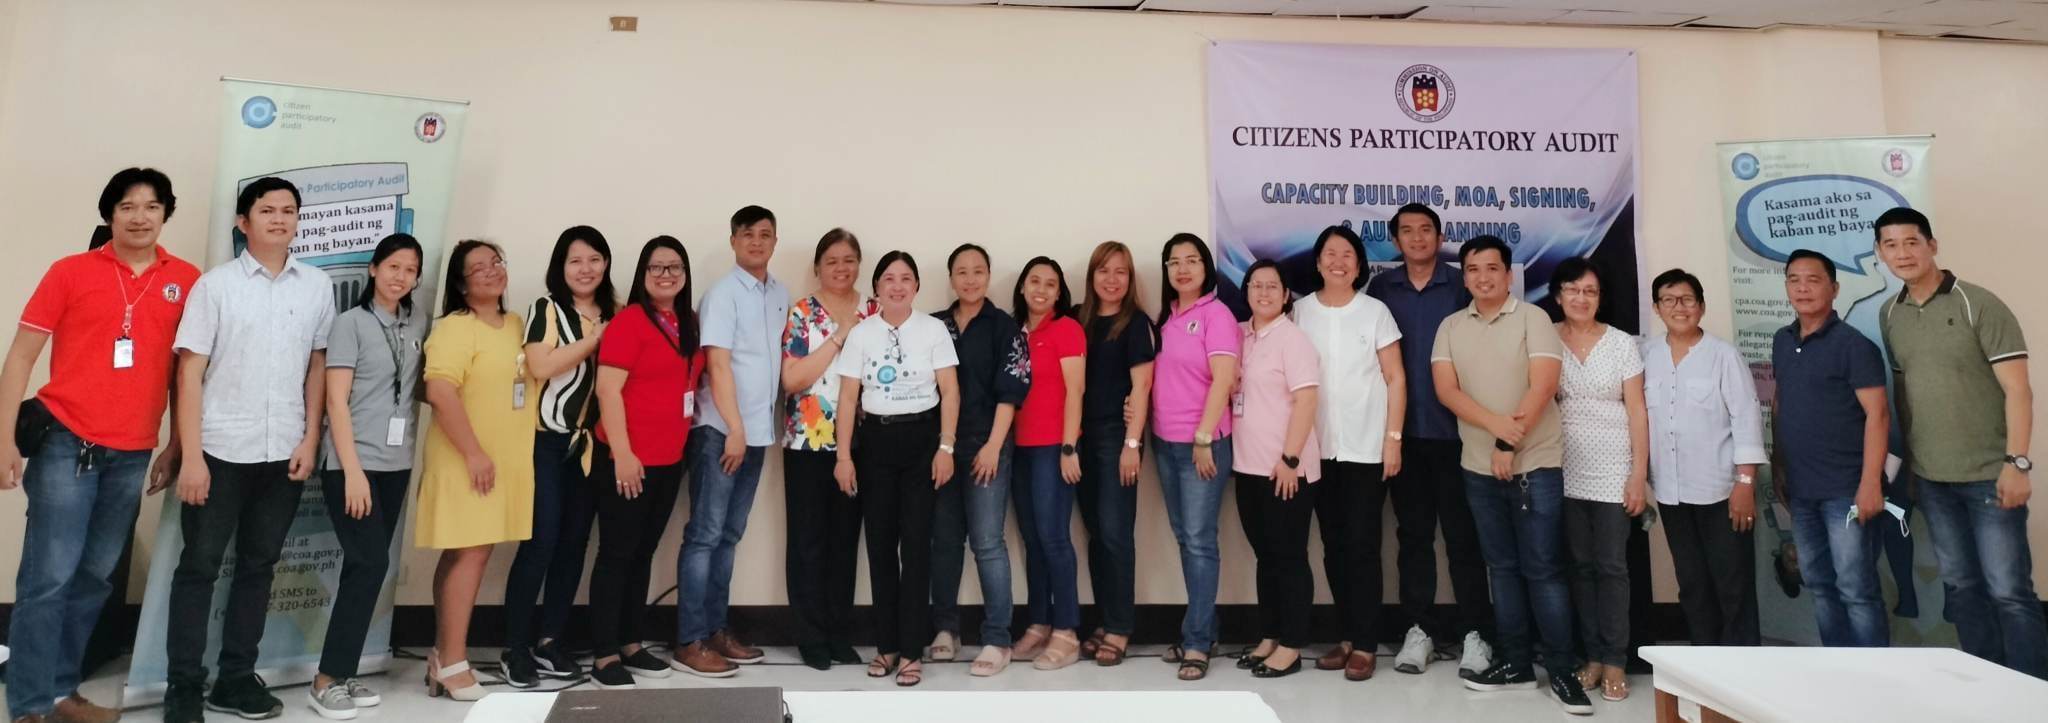 Capacity Building, MOA Signing and Audit Planning of the CPA on the Utilization of COVID-19 Funds of the Provincial Government of Isabela